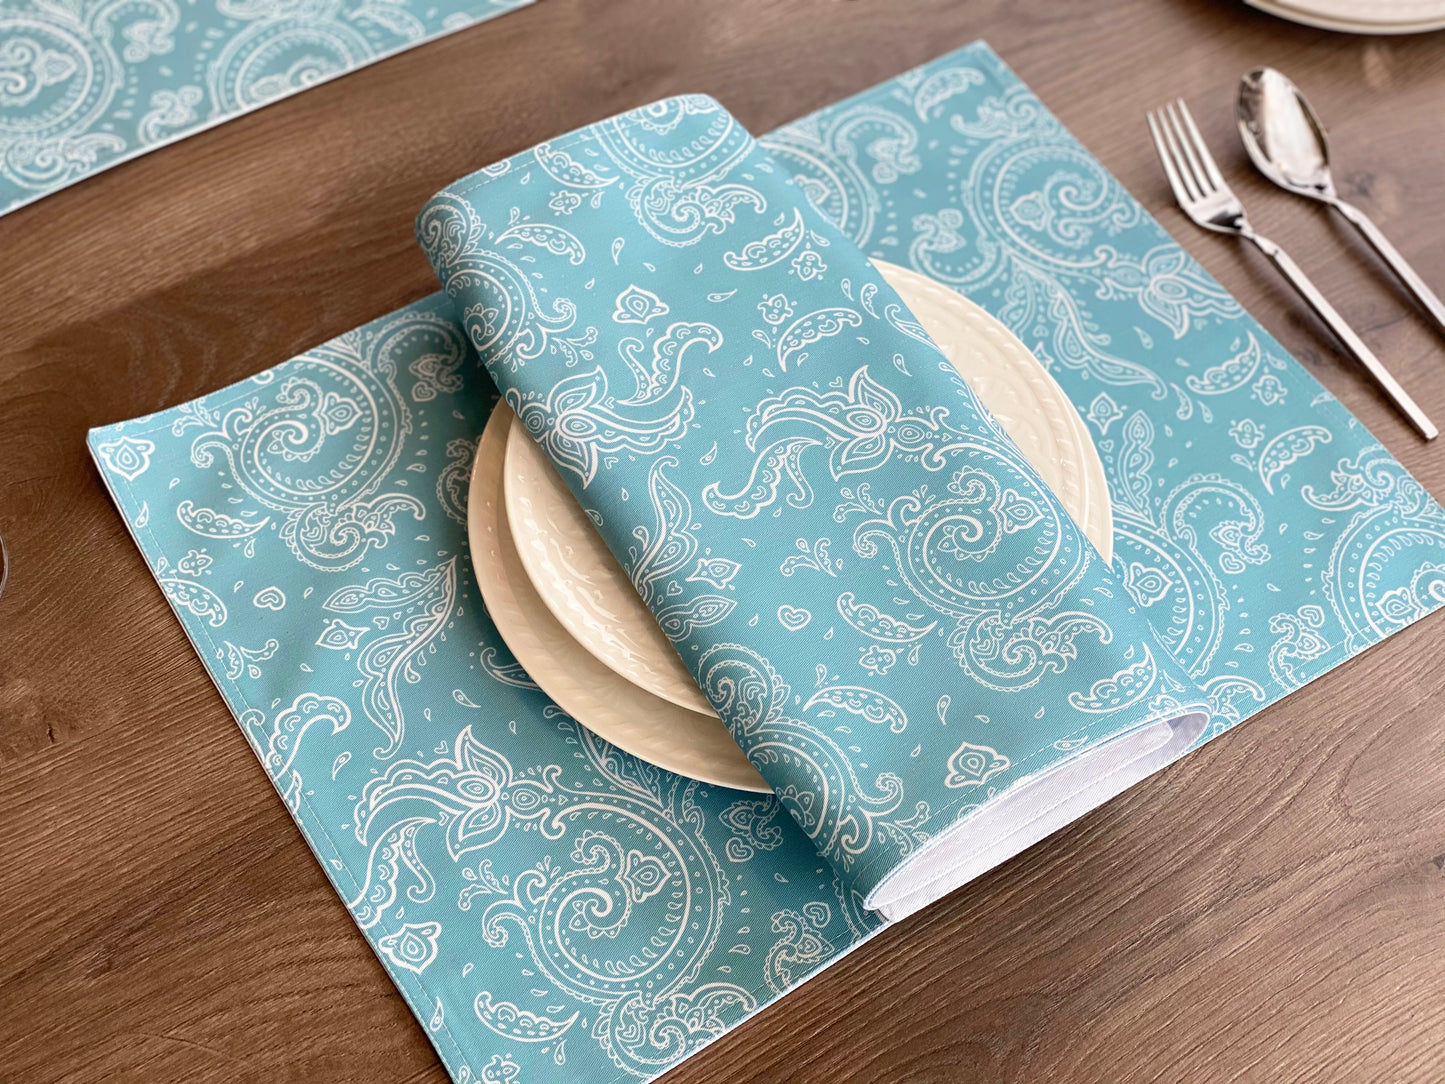 Set of 4 Blue Paisley Print Placemat, retro pattern fabric placemat, 14" x 19". Washable Cotton Placemat for fall dining table